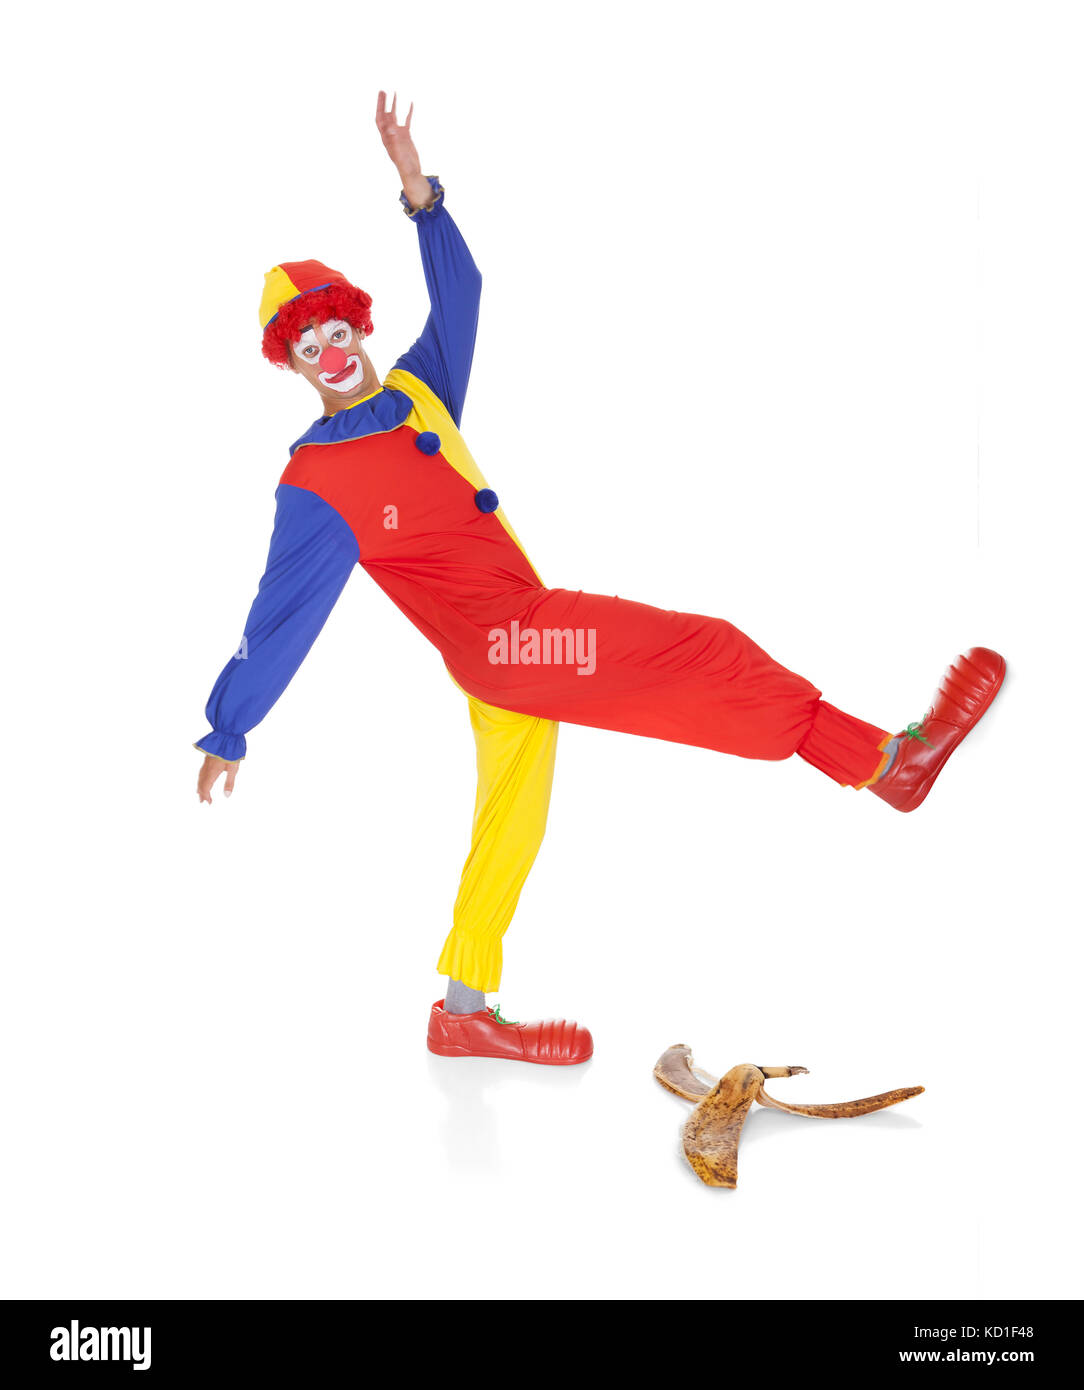 Joker About To Fall On Banana Skin Over White Background Stock Photo